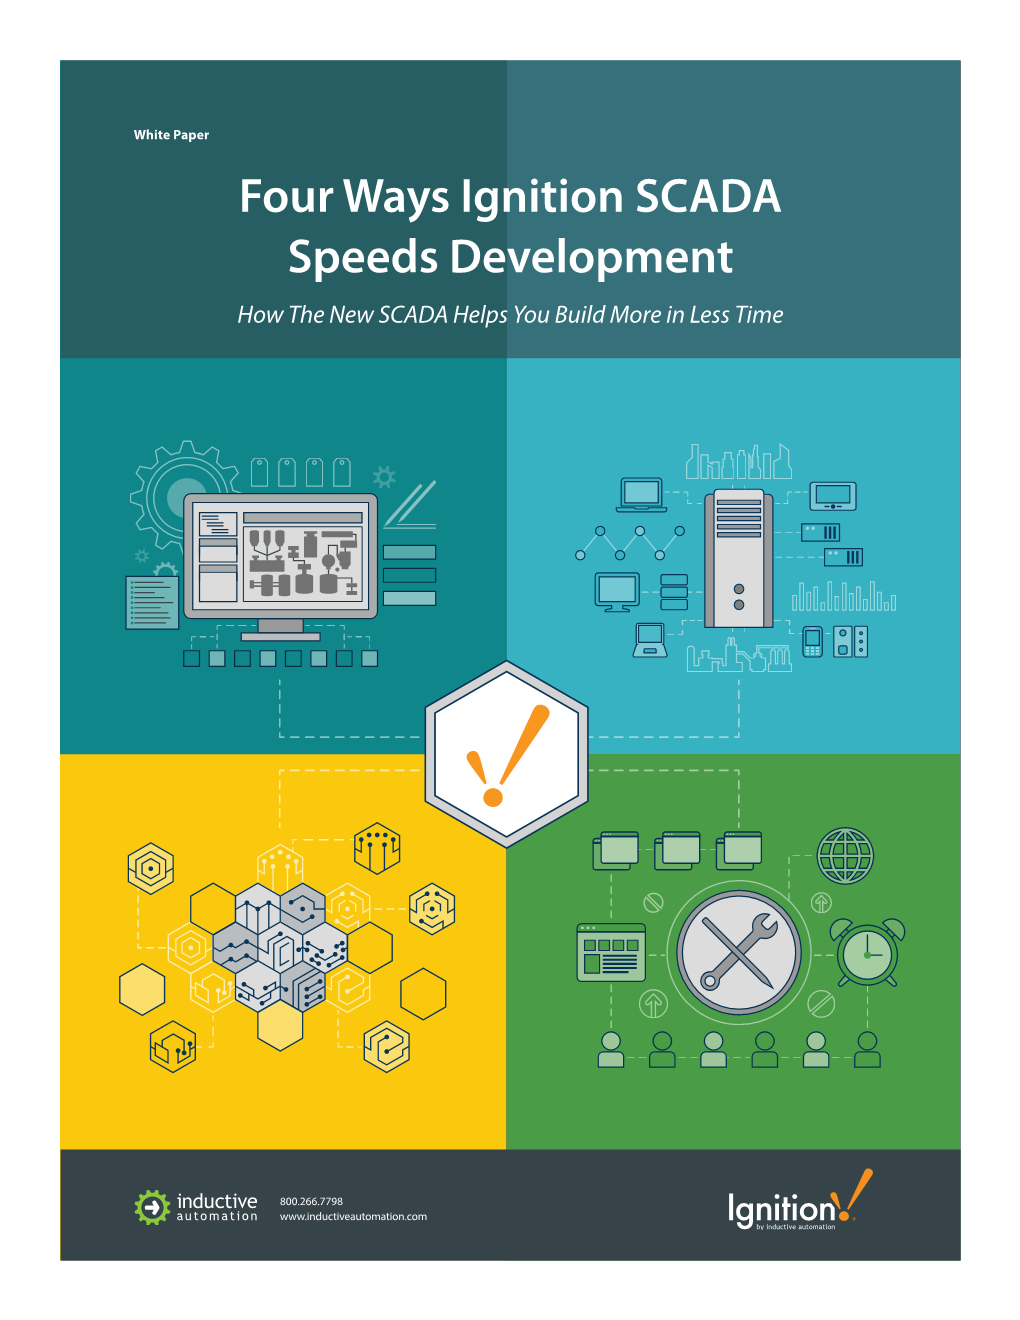 Four Ways Ignition SCADA Speeds Development How the New SCADA Helps You Build More in Less Time